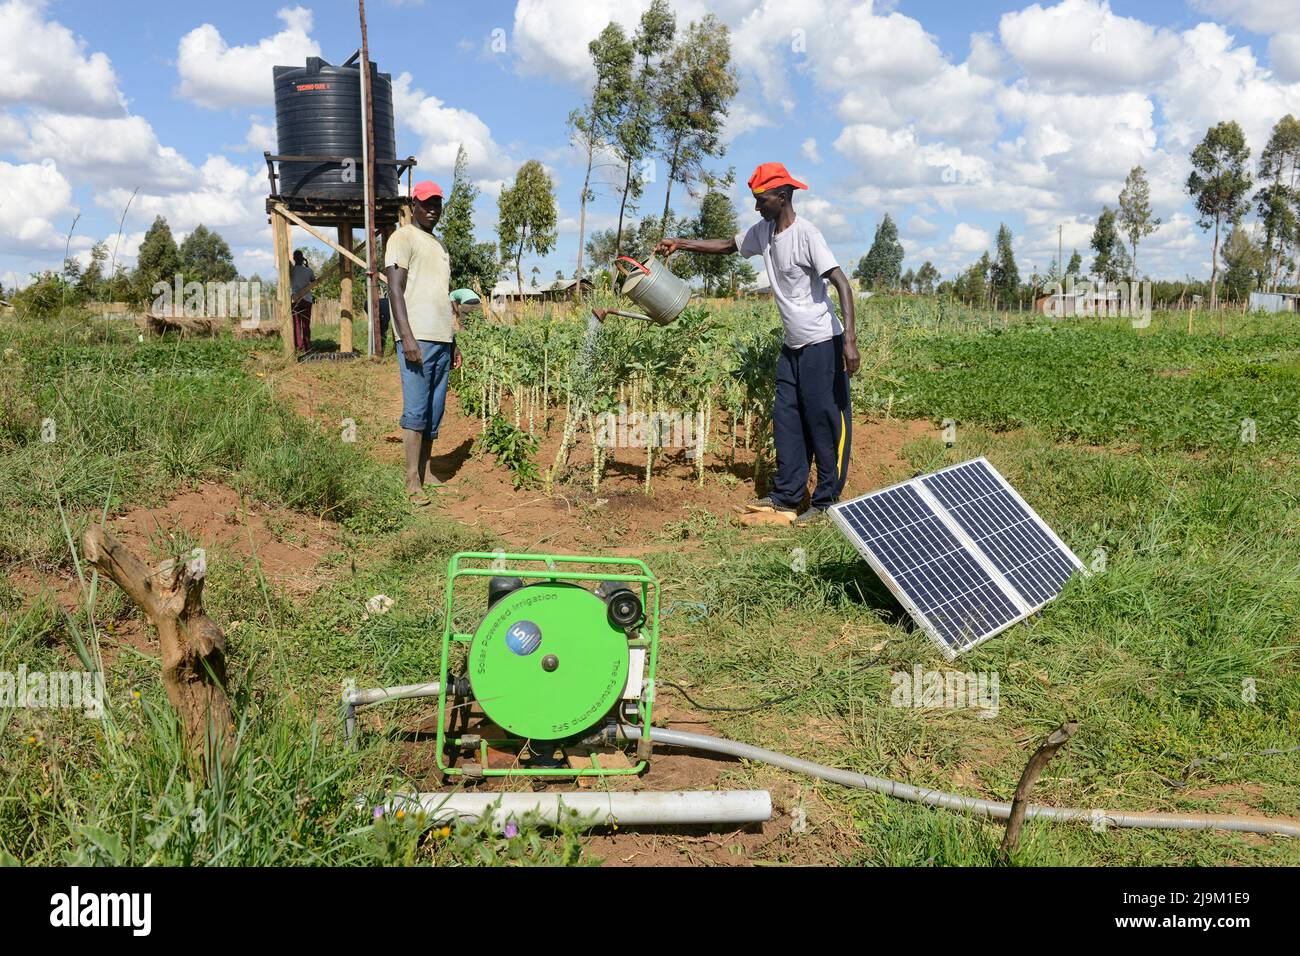 KENYA, town Eldoret, village Kiplombe, farmer uses a mobile Solar PV panel to power a small electric pump to fill water from a well in a tank for drip irrigation of vegetables Stock Photo